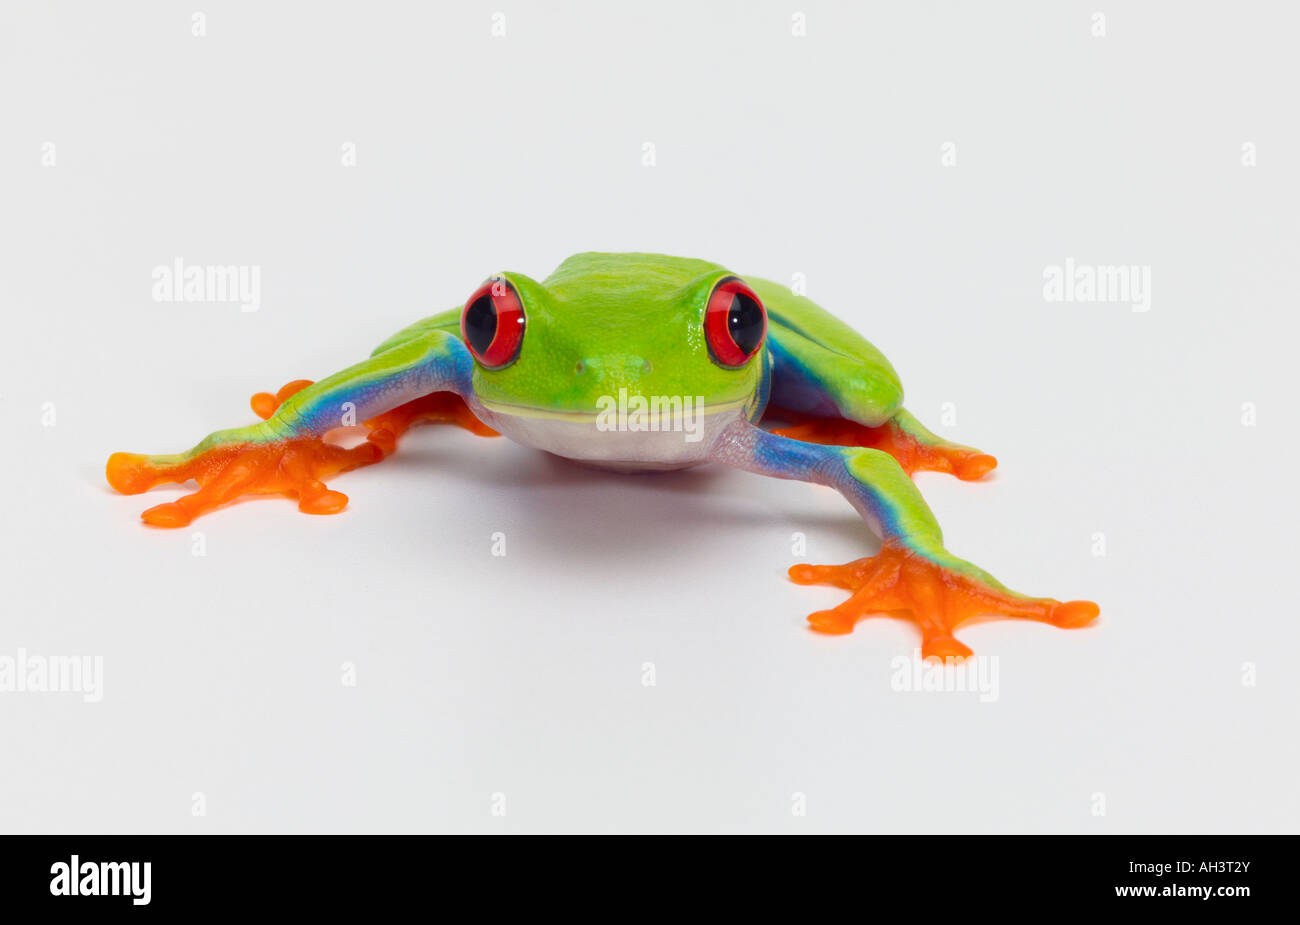 Red eyed tree frog 5 Banque D'Images